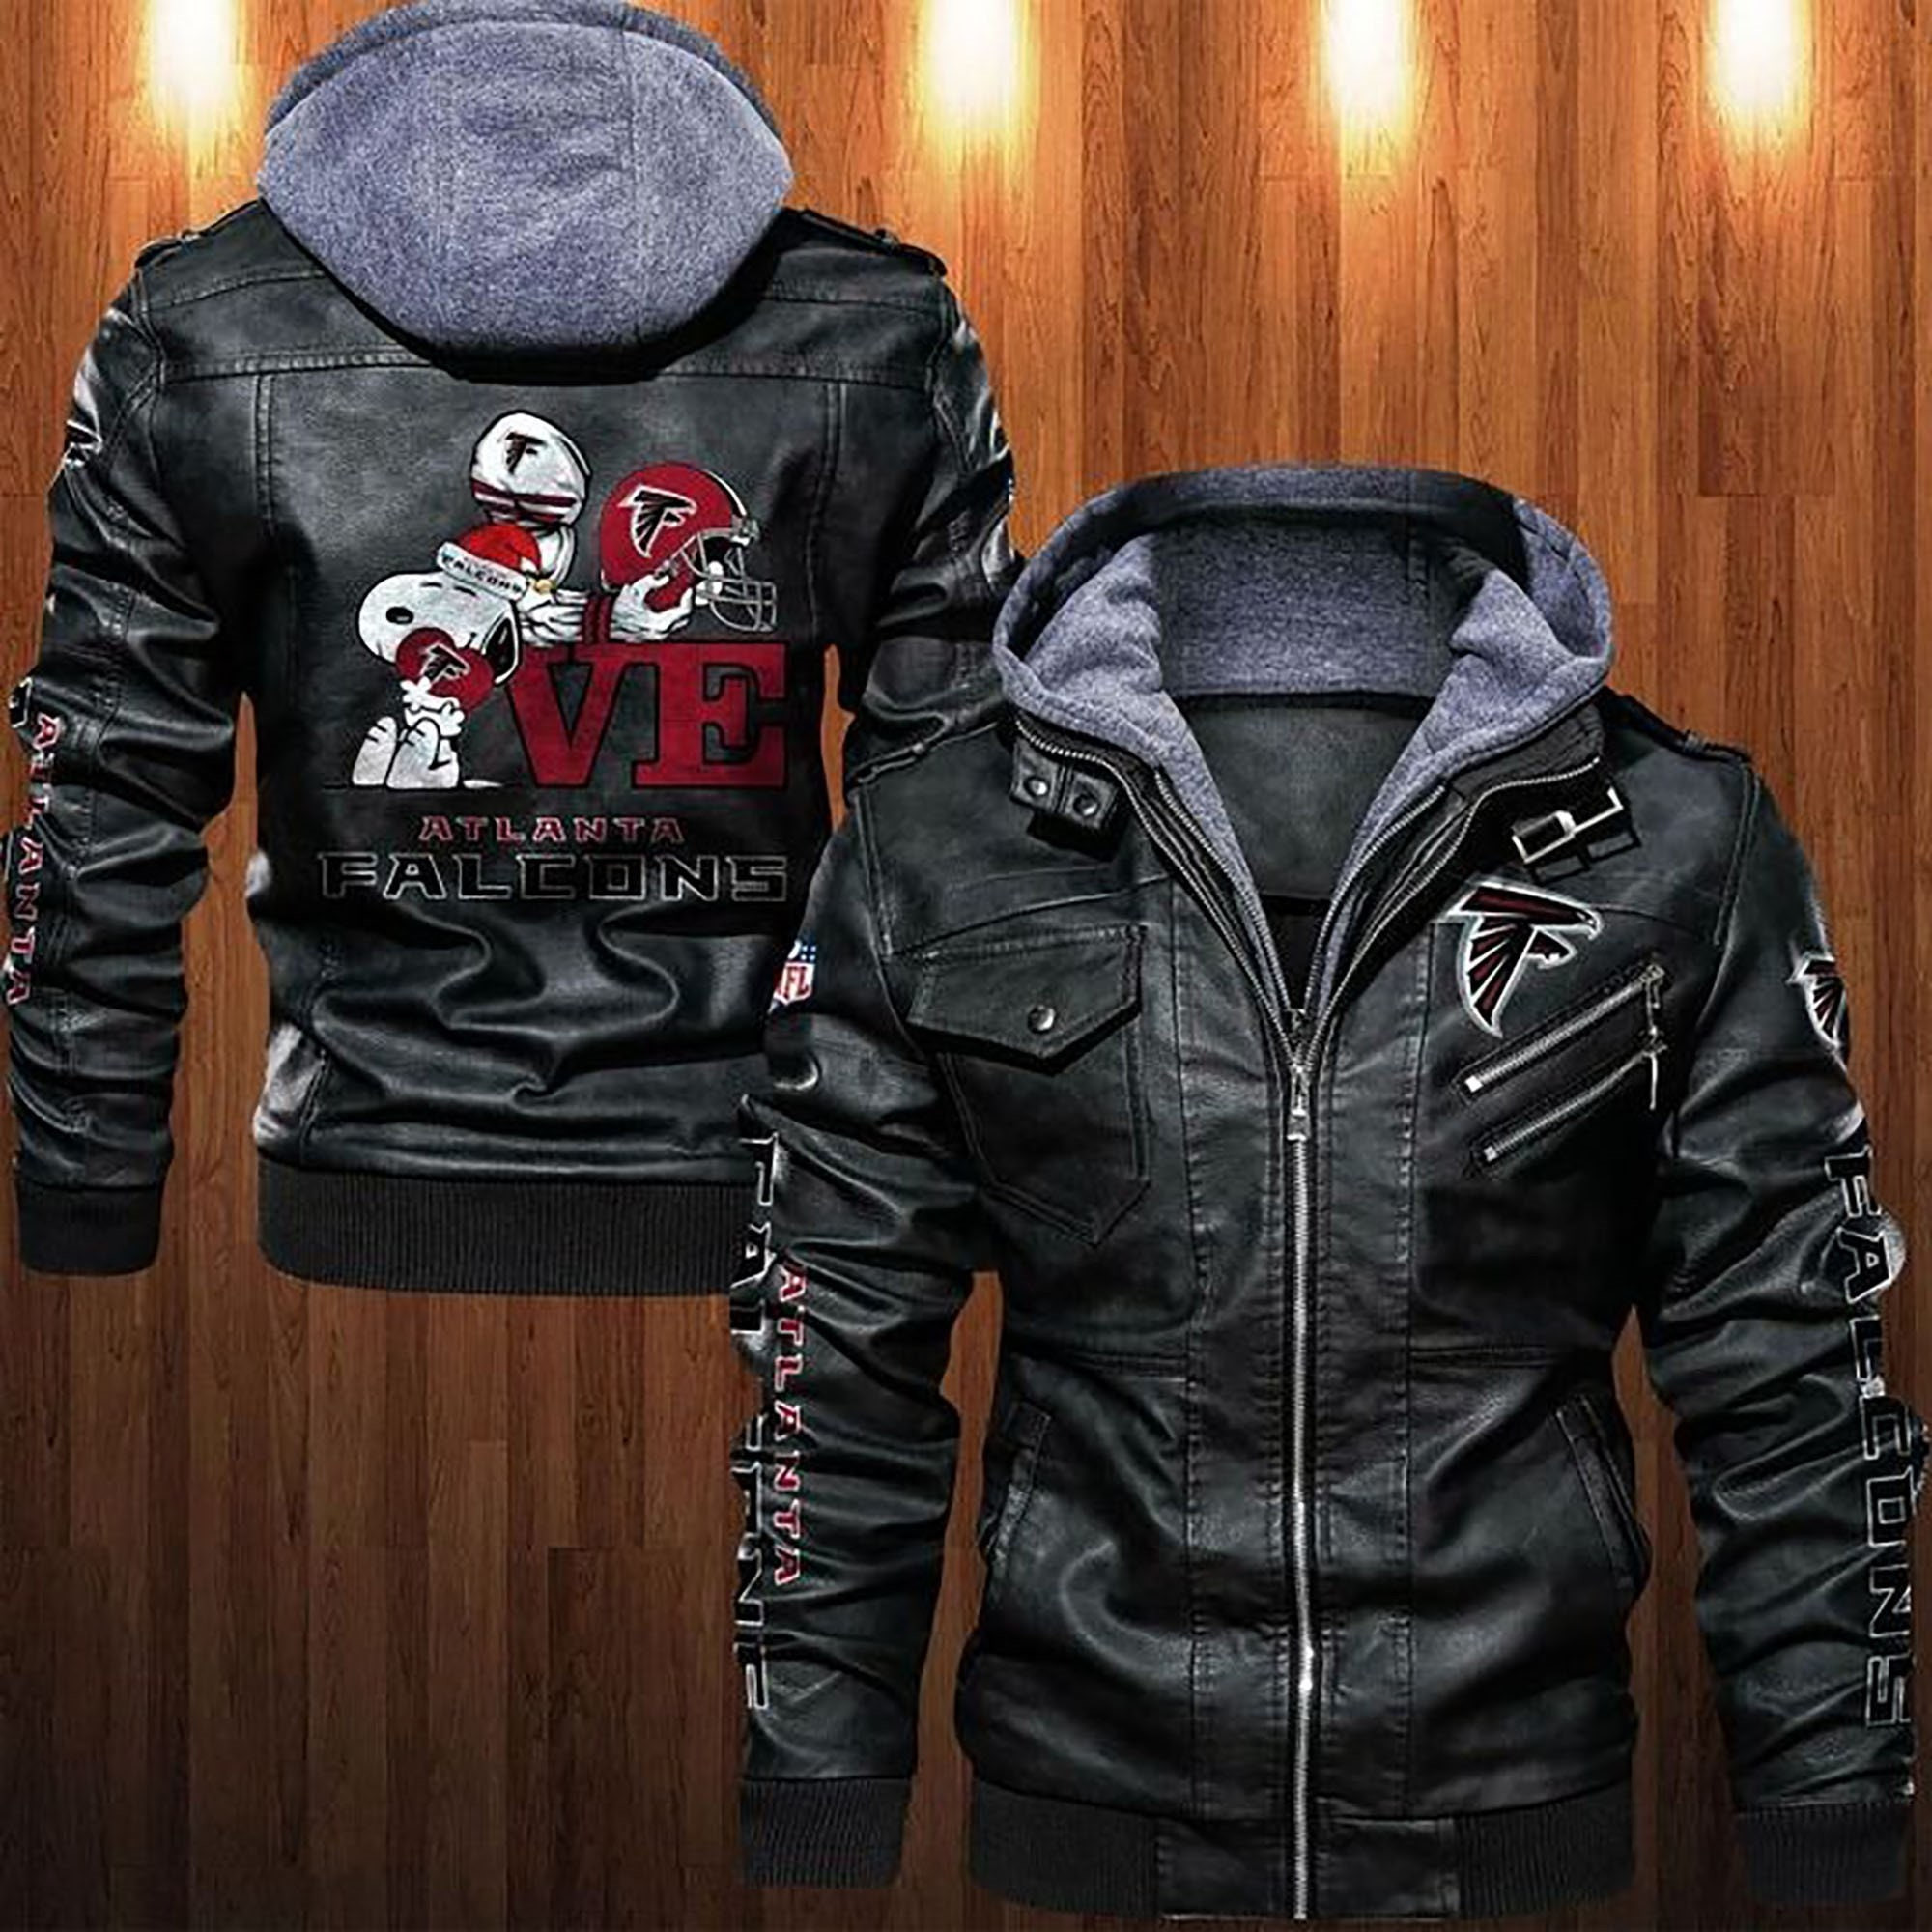 These Amazing Leather Jacket will add to the appeal of your outfit 185